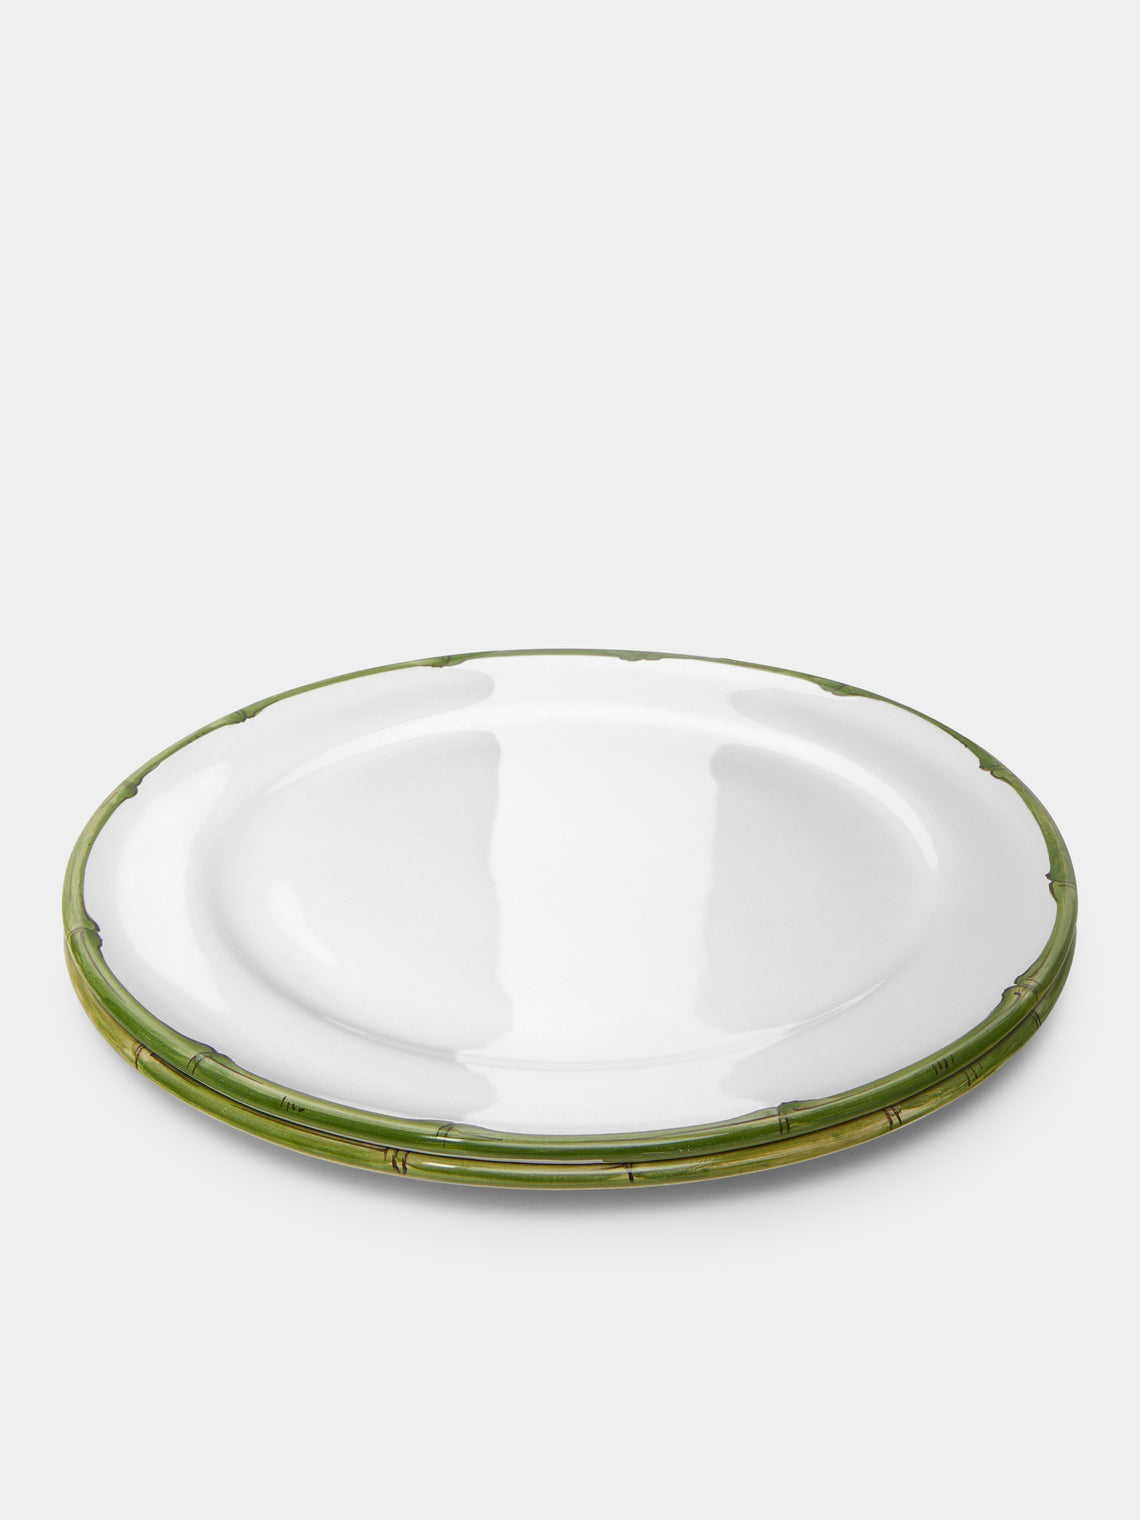 Z.d.G - Ramatuelle Bamboo Hand-Painted Ceramic Charger Plates (Set of 2) - Green - ABASK